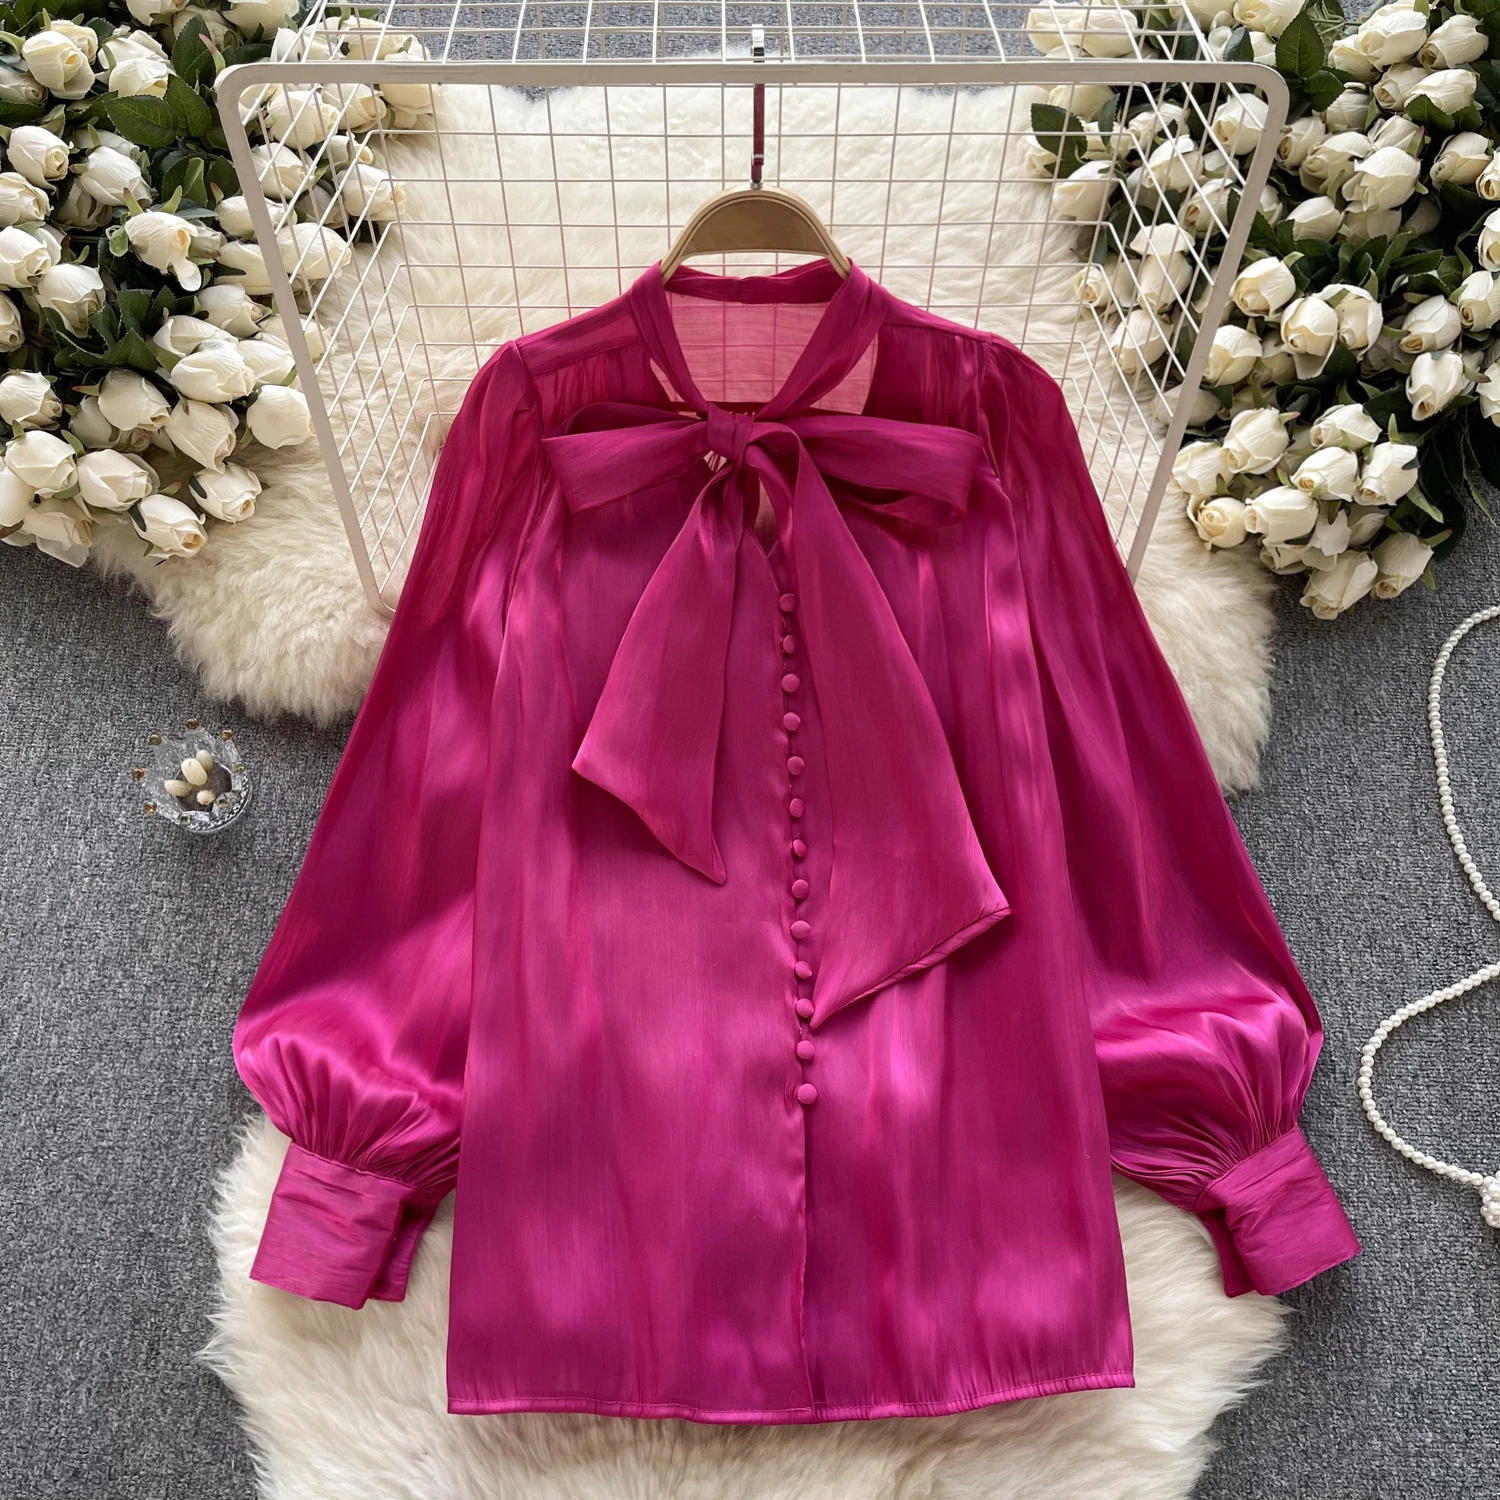 

Clothland Women Elegant Bow Tie Blouse Single Breasted Long Sleeve Candy Color See Through Shirt Sexy Tops Blusa Mujer LA997